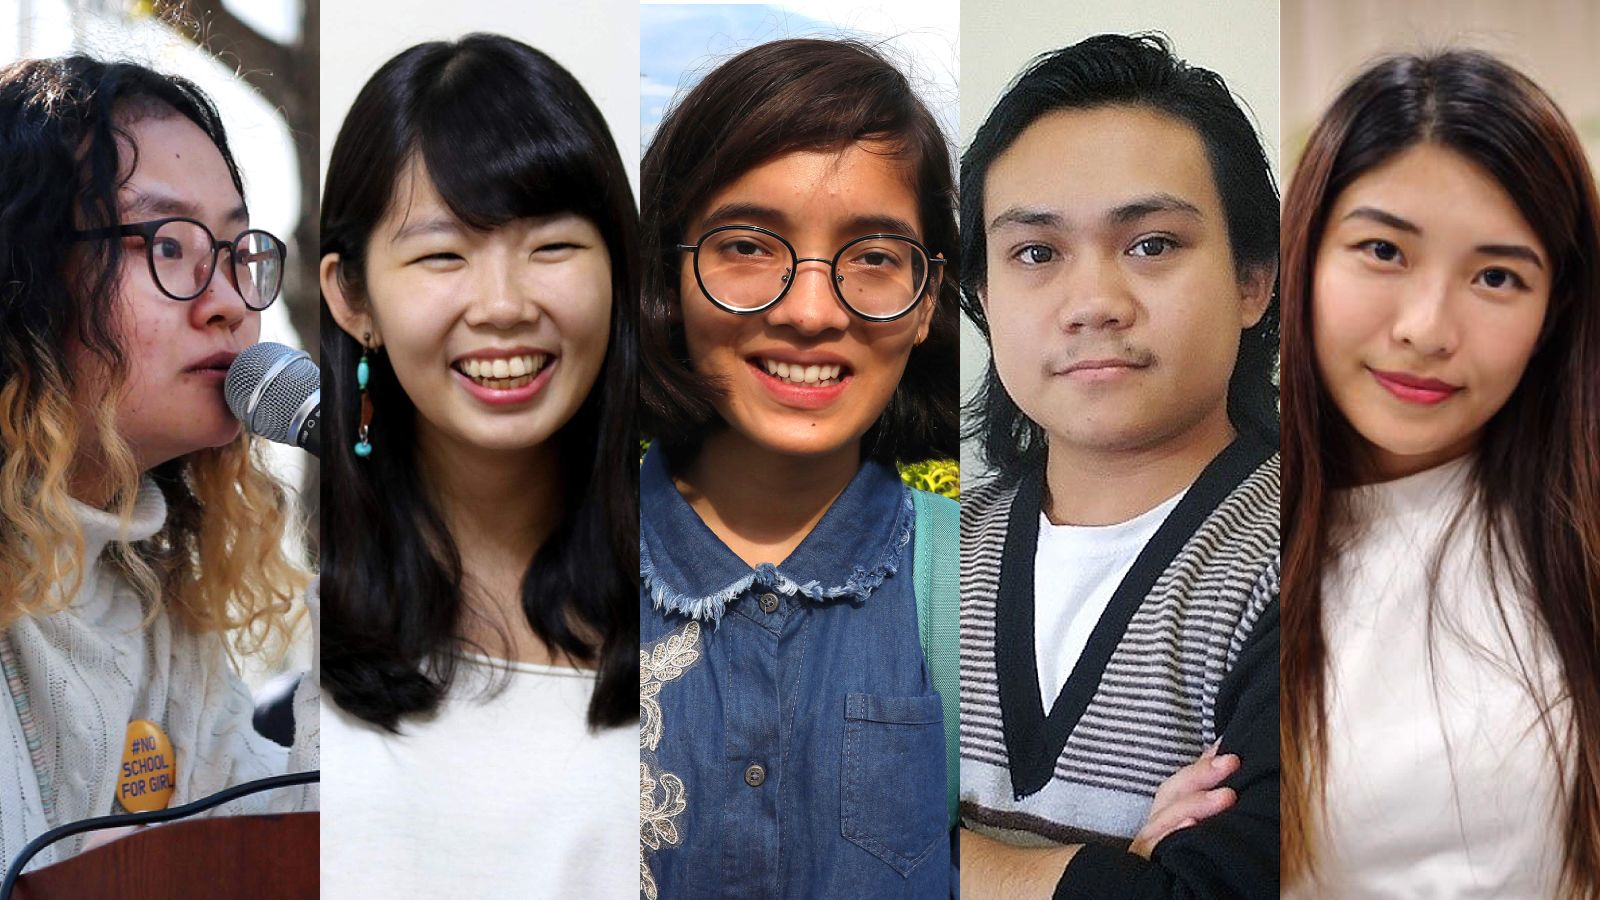 Xxx Student Boy And Girl - Meet 5 young activists who drove change in Asia this year | CNN